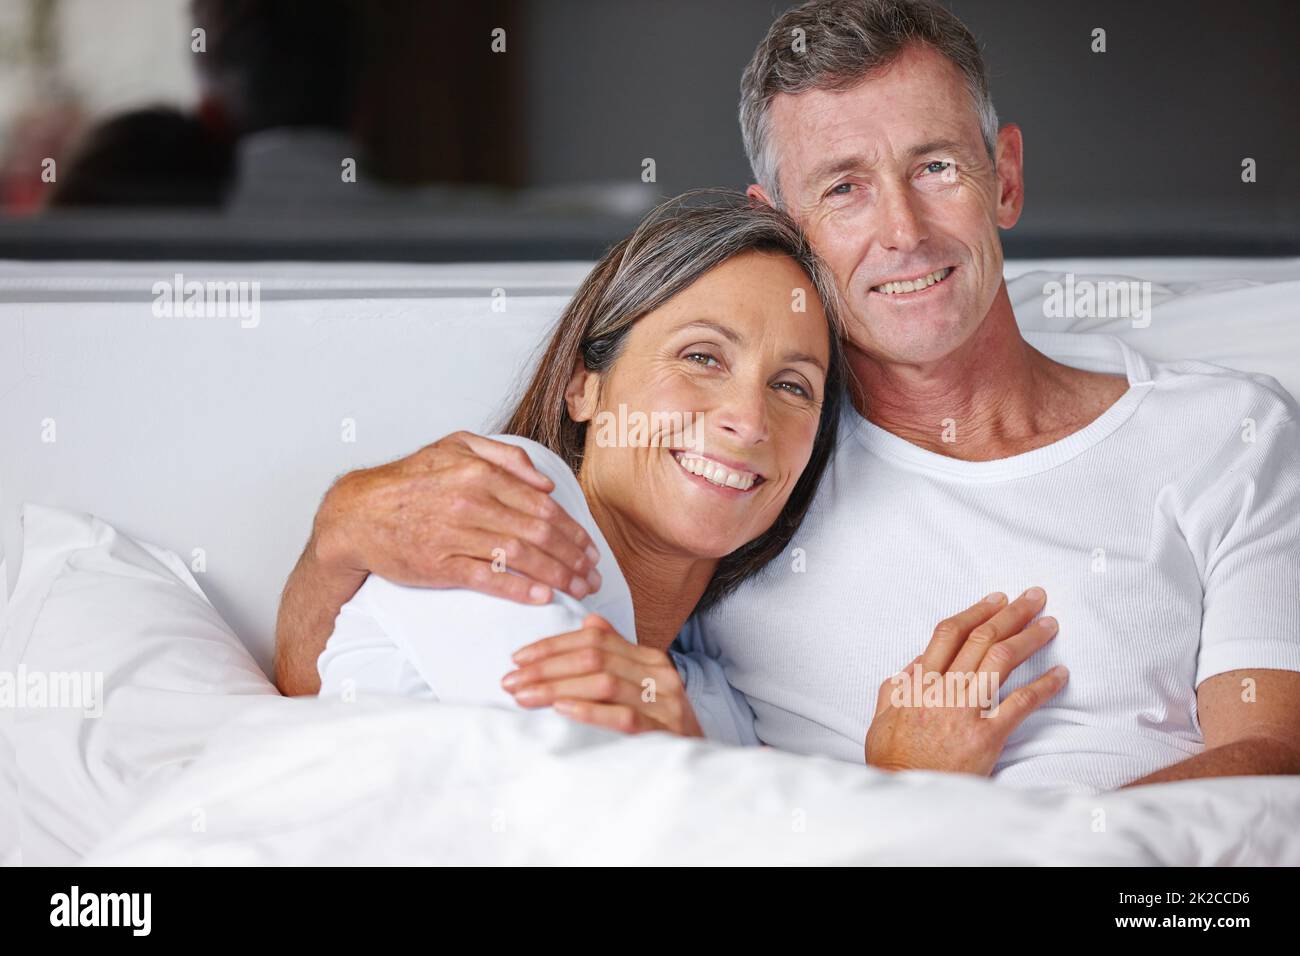 Time for some snuggling. Portrait of a loving mature couple cuddling in bed. Stock Photo